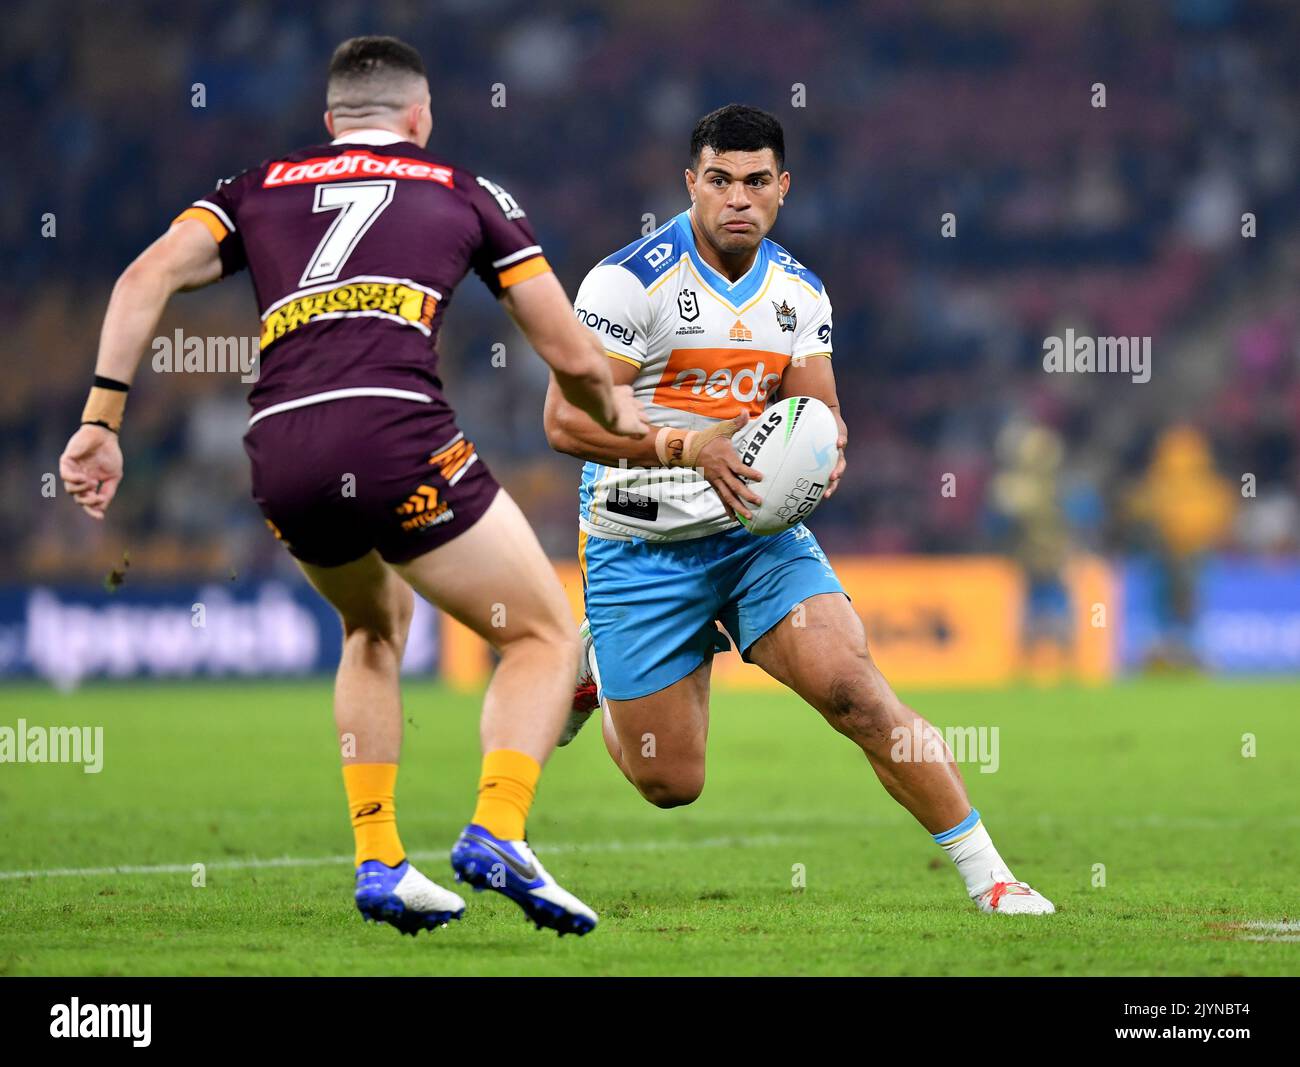 David Fifita (right) of the Titans takes on Tyson Gamble (left) of the Broncos during the Round 8 NRL match between the Gold Coast Titans and the Brisbane Broncos at Suncorp Stadium in Brisbane, Friday, April 30, 2021. (AAP Image/Darren England) NO ARCHIVING, EDITORIAL USE ONLY ** STRICTLY EDITORIAL USE ONLY, NO COMMERCIAL USE, NO BOOKS ** Stock Photo